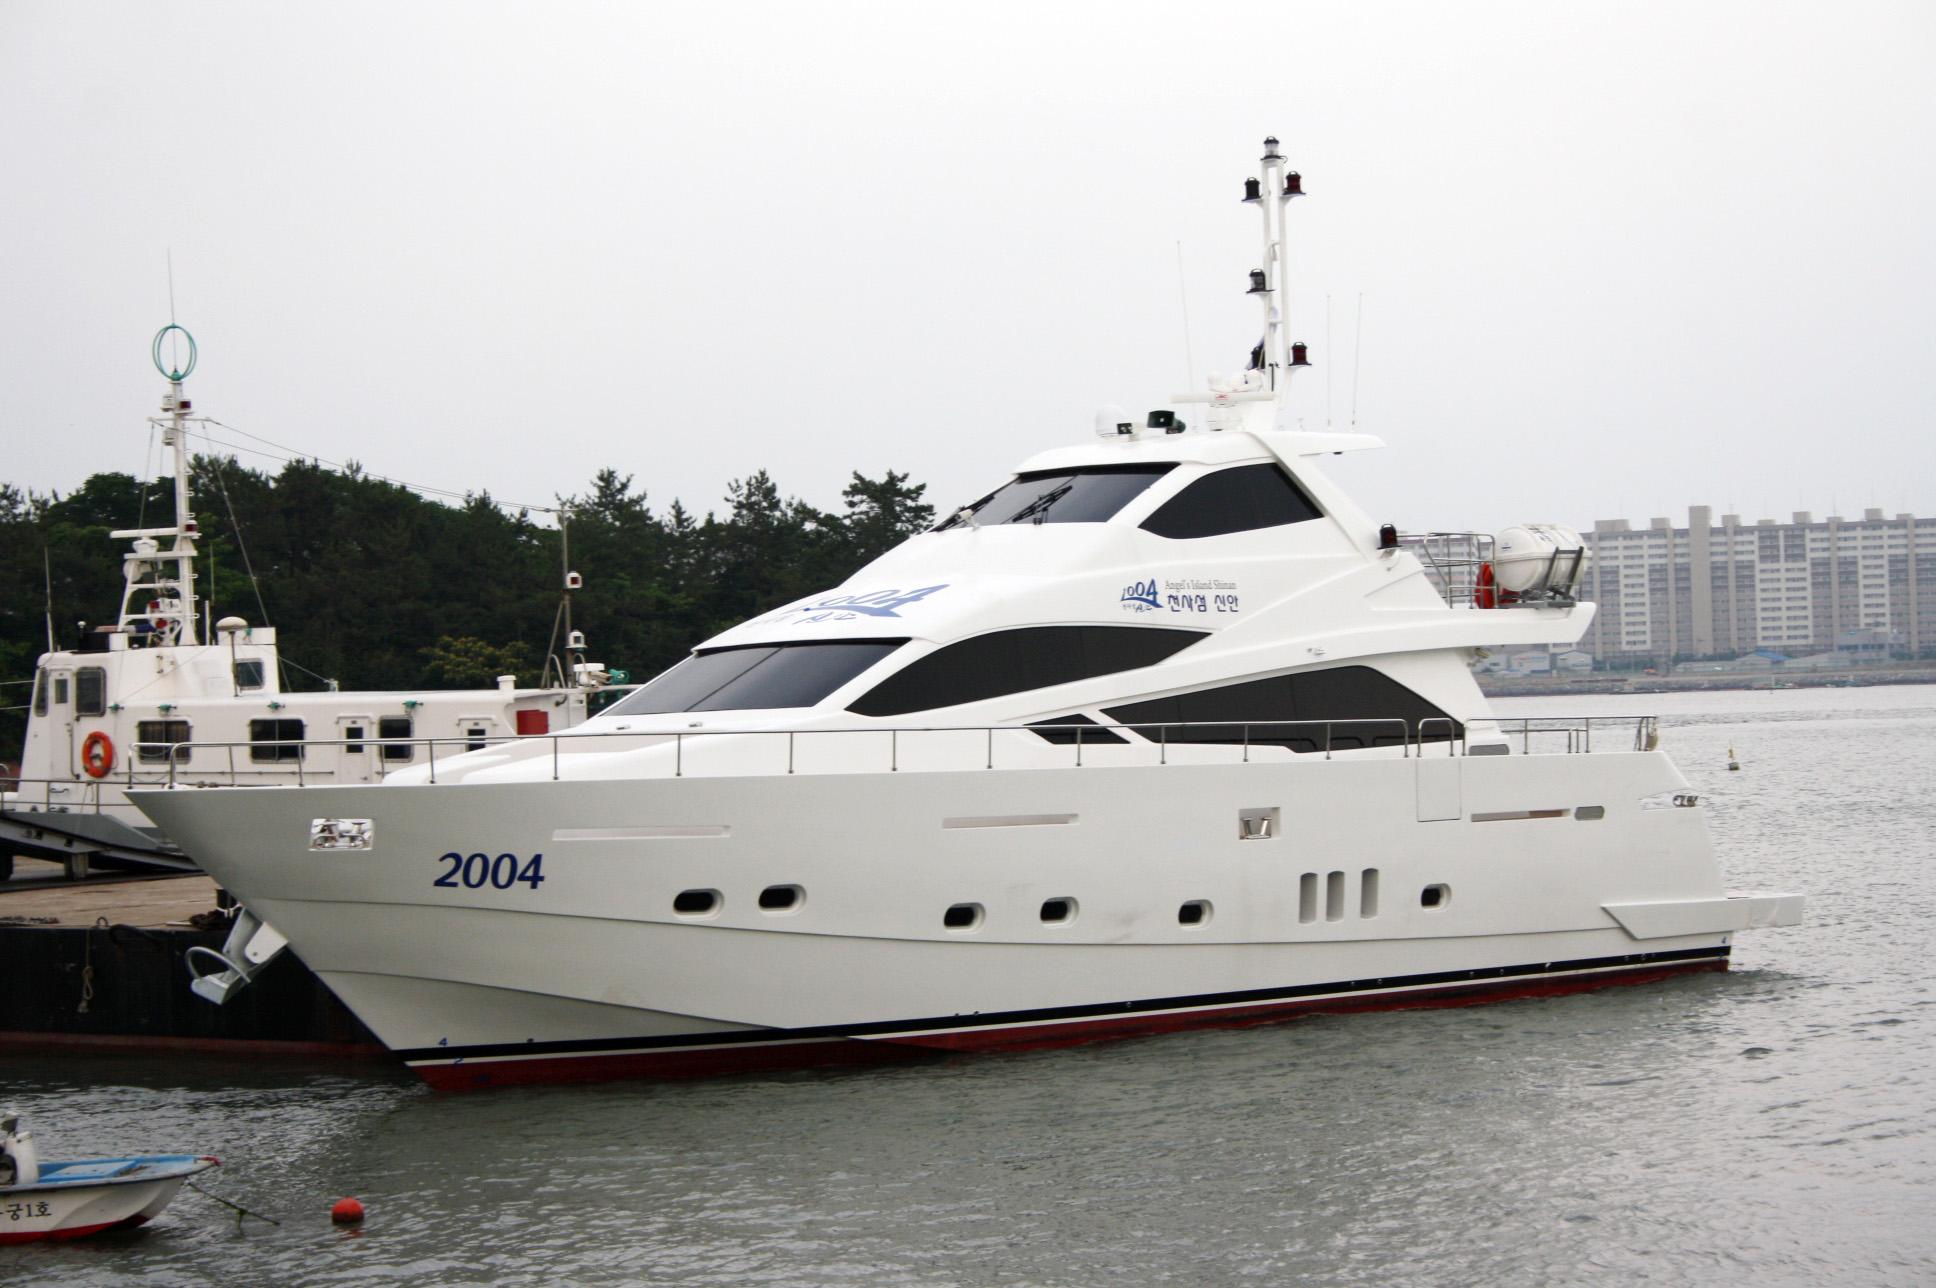 GHI YACHTS